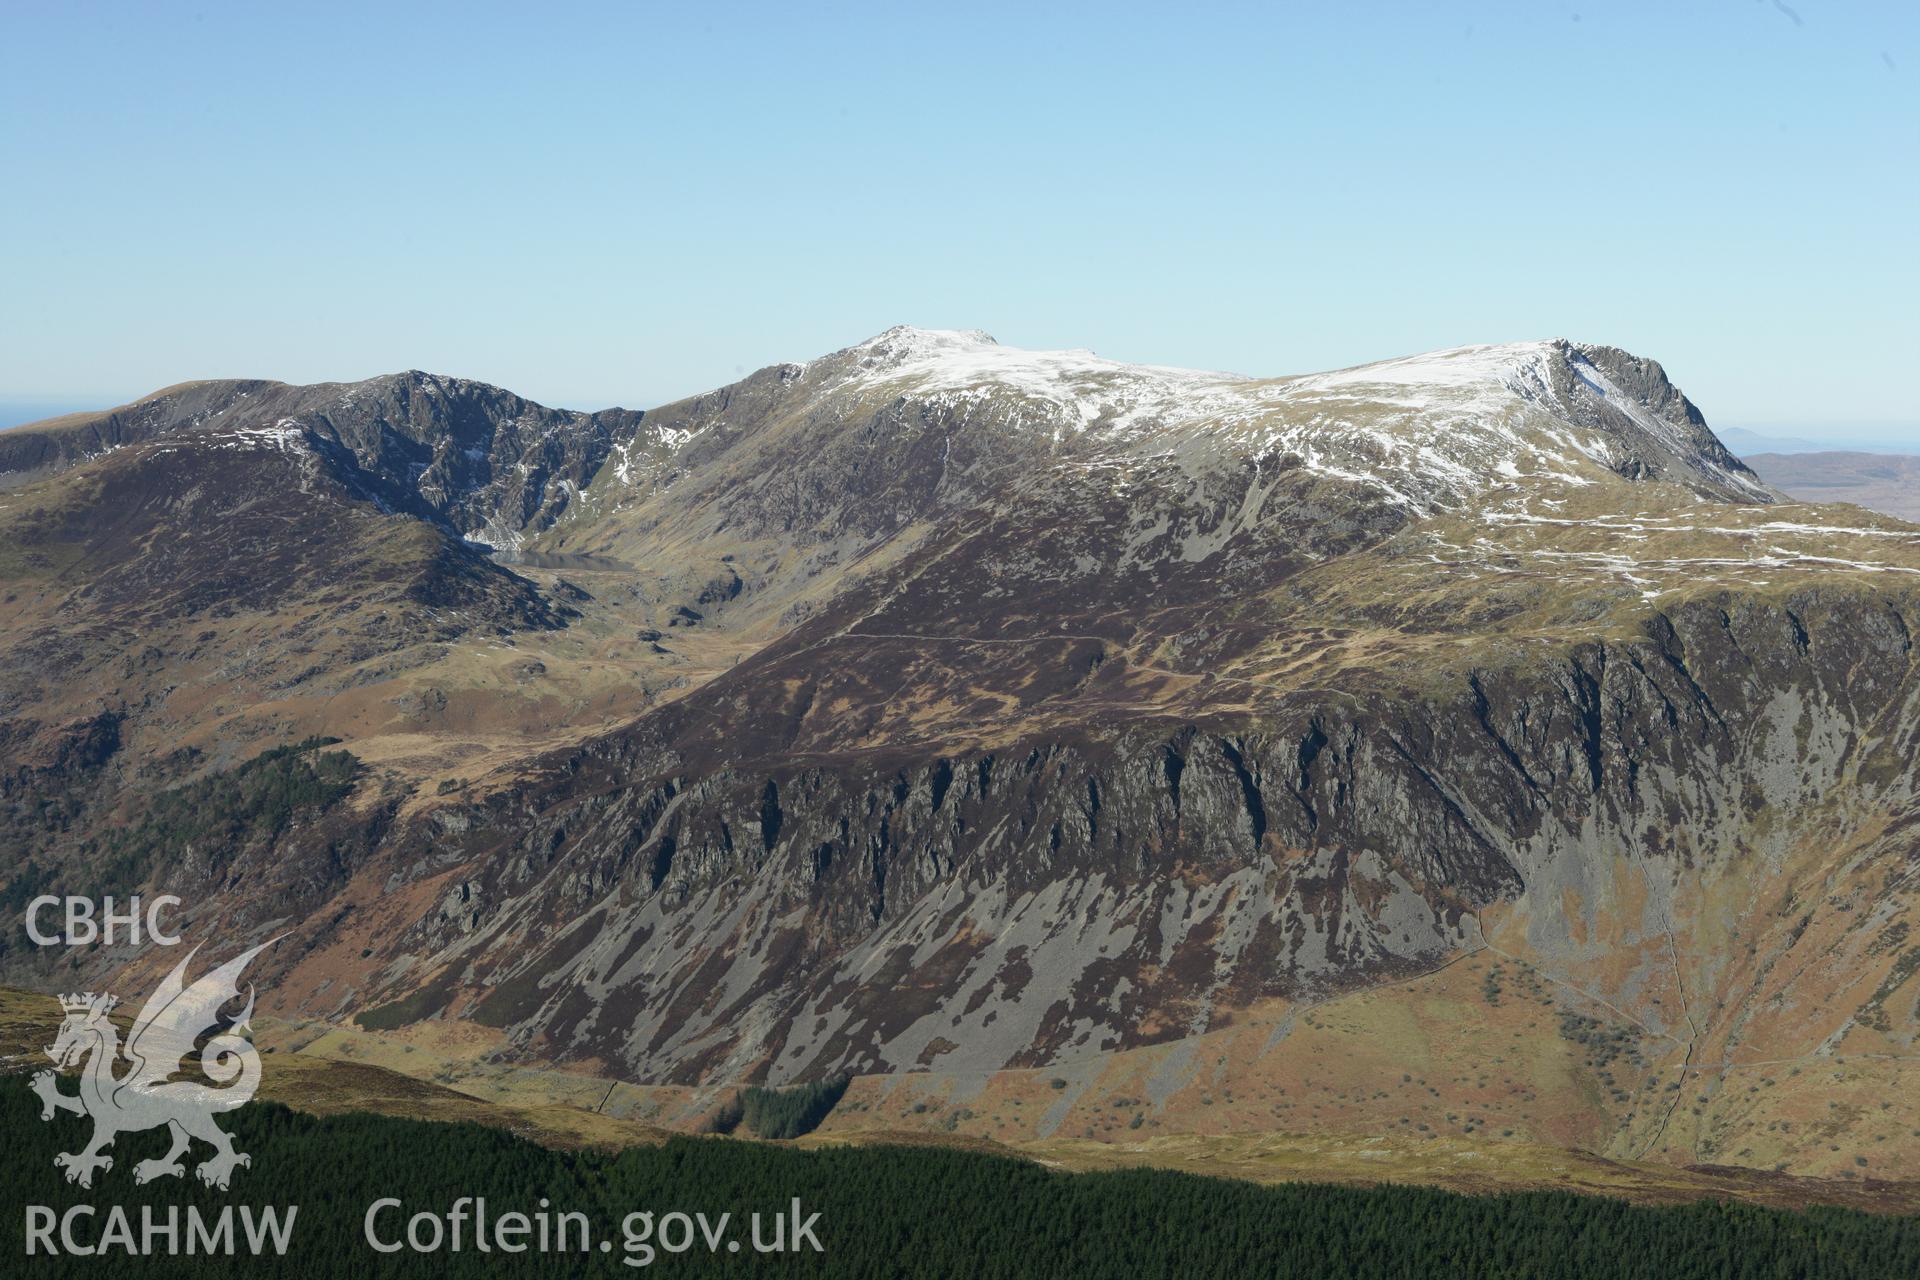 RCAHMW colour oblique photograph of Cadair Idris, looking north-west from Cwm Rhwyddor. Taken by Toby Driver on 08/03/2010.